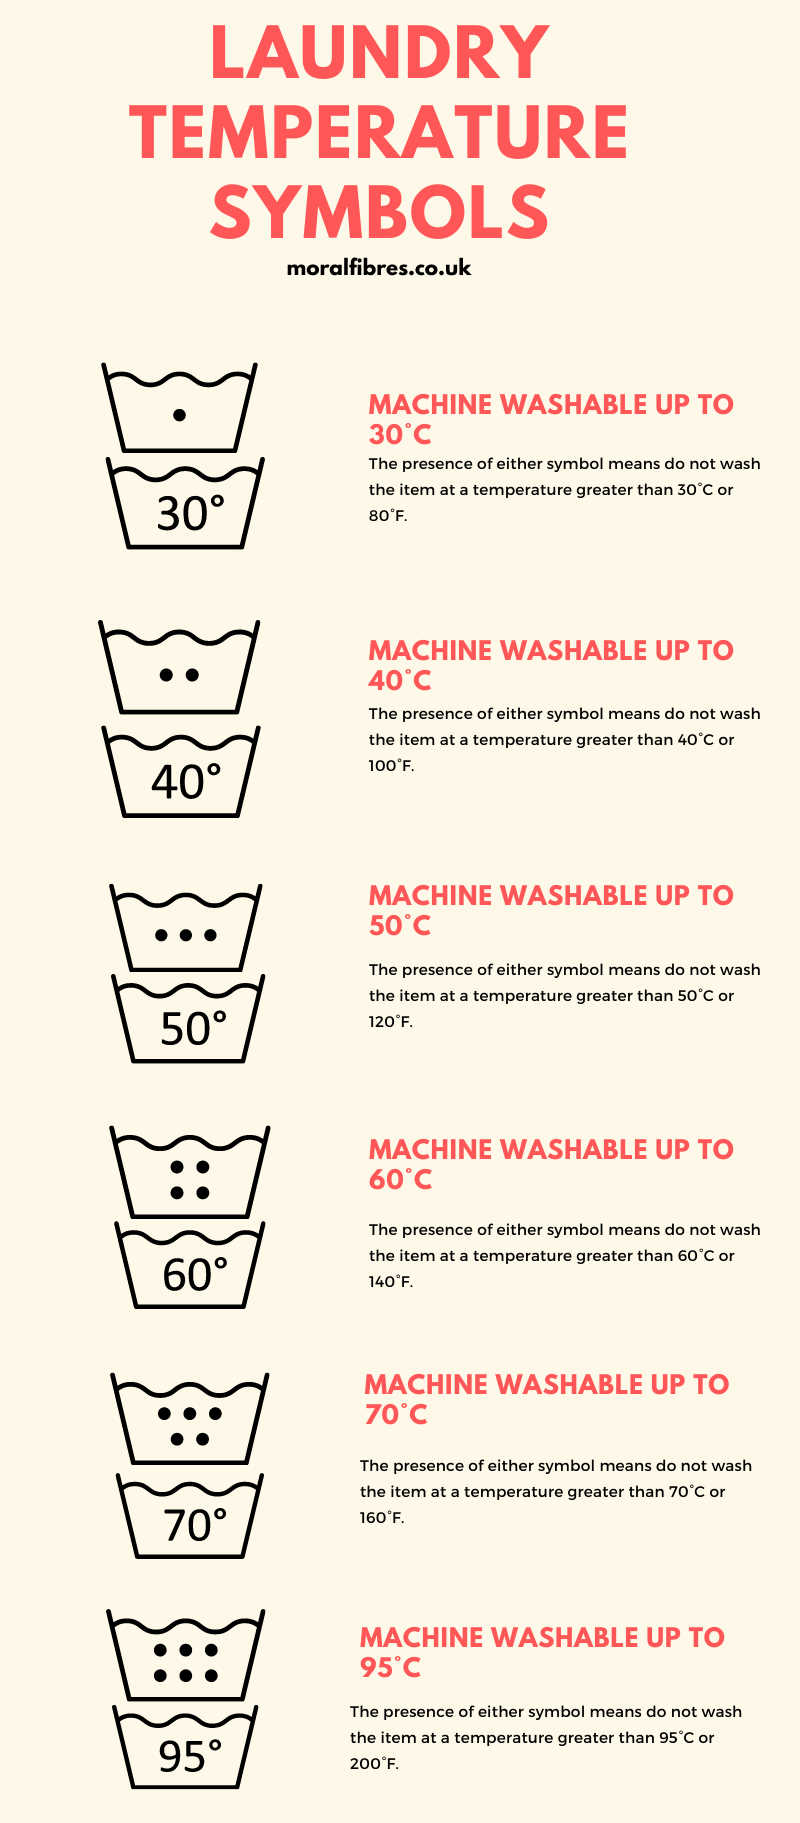 UK laundry washing temperature symbols - depicted as dots or temperatures inside a tub of water.